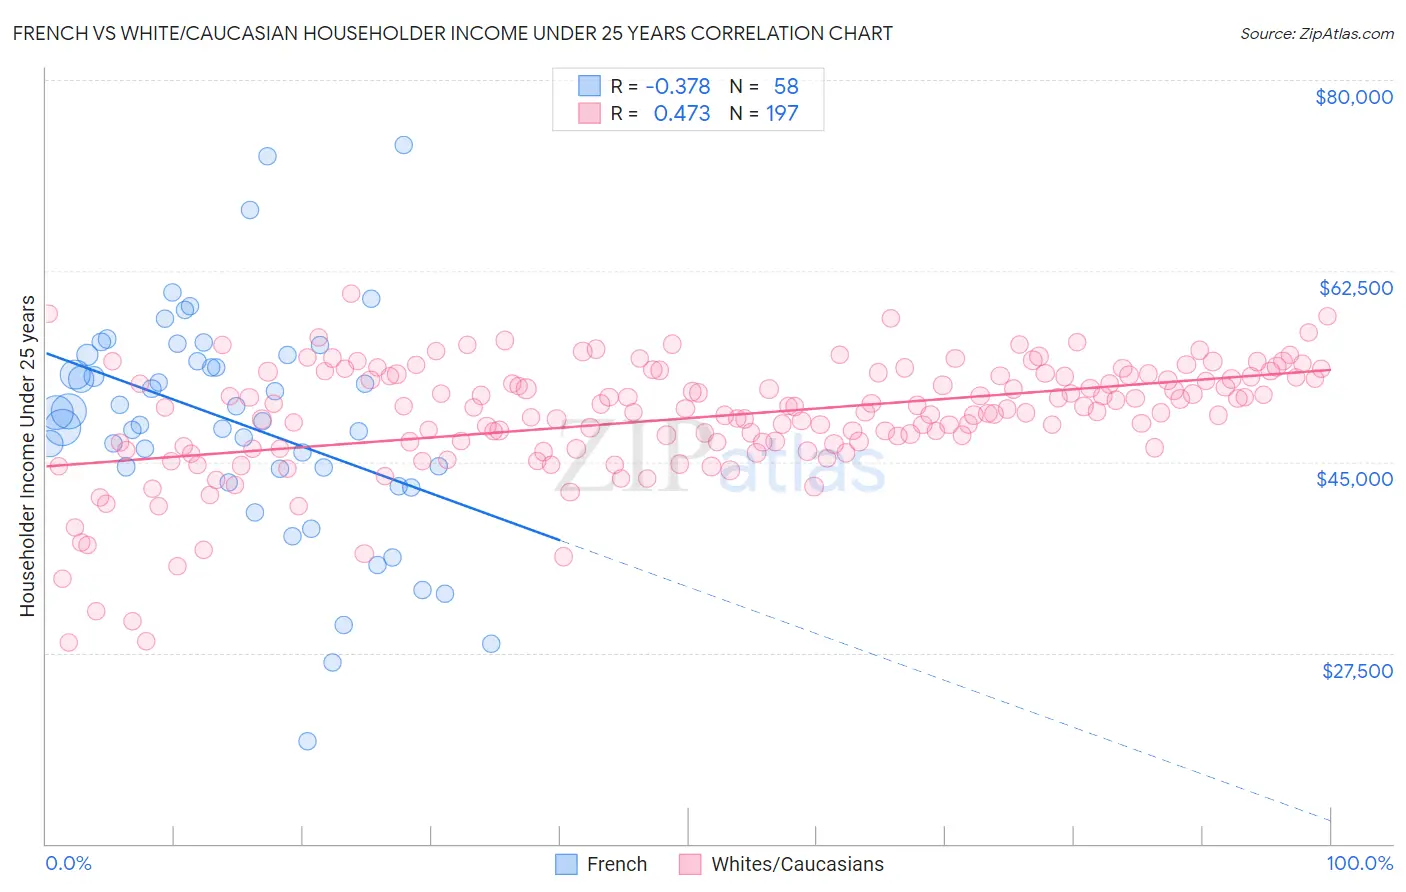 French vs White/Caucasian Householder Income Under 25 years